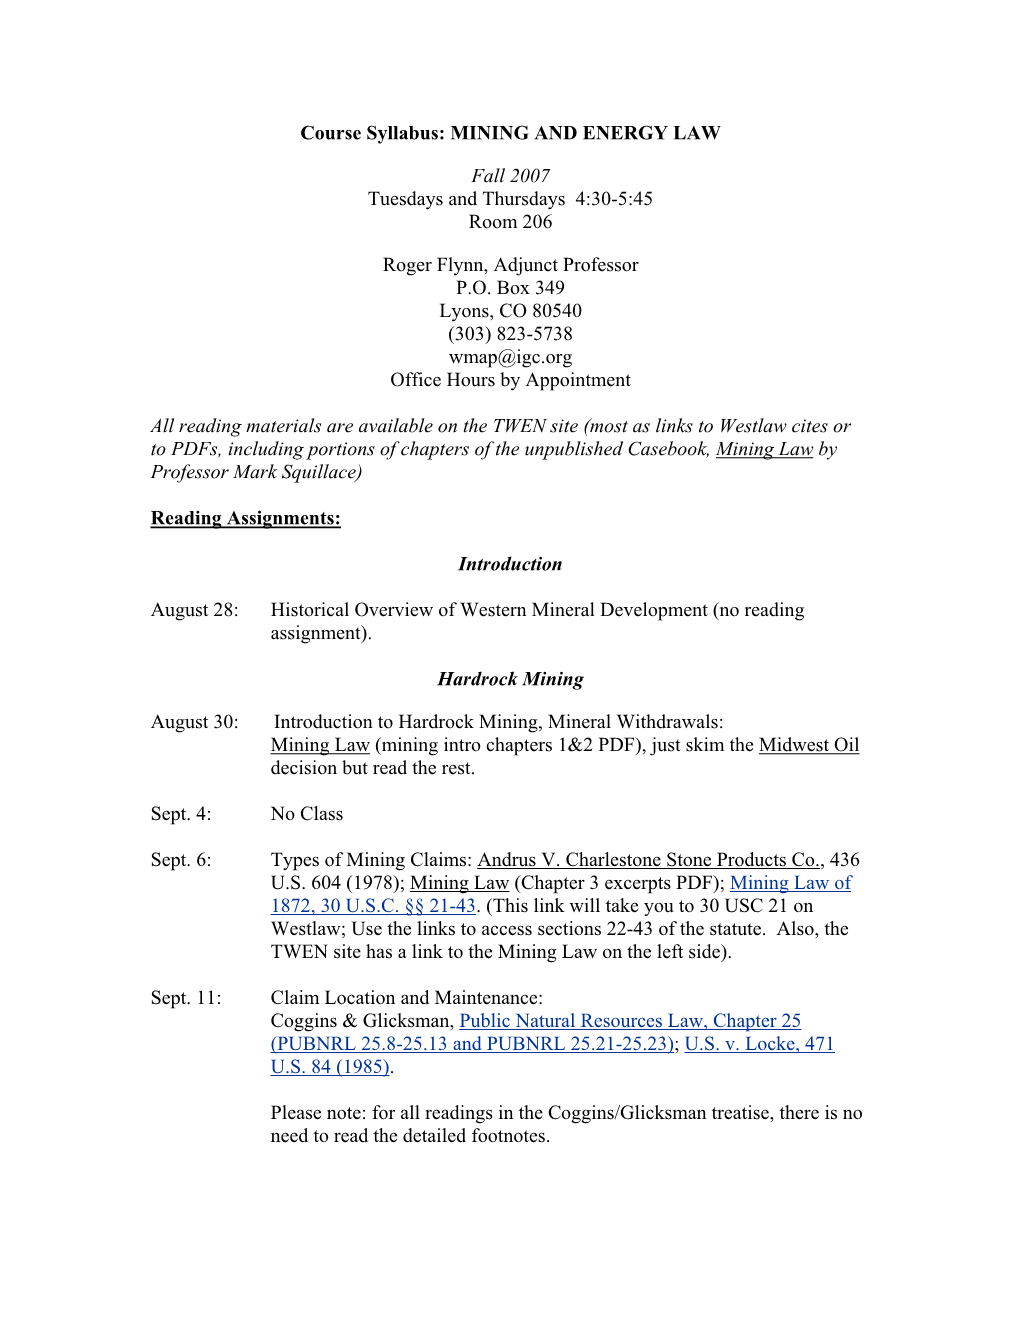 Course Syllabus Mining and Energy Law Fall 2007.Pdf